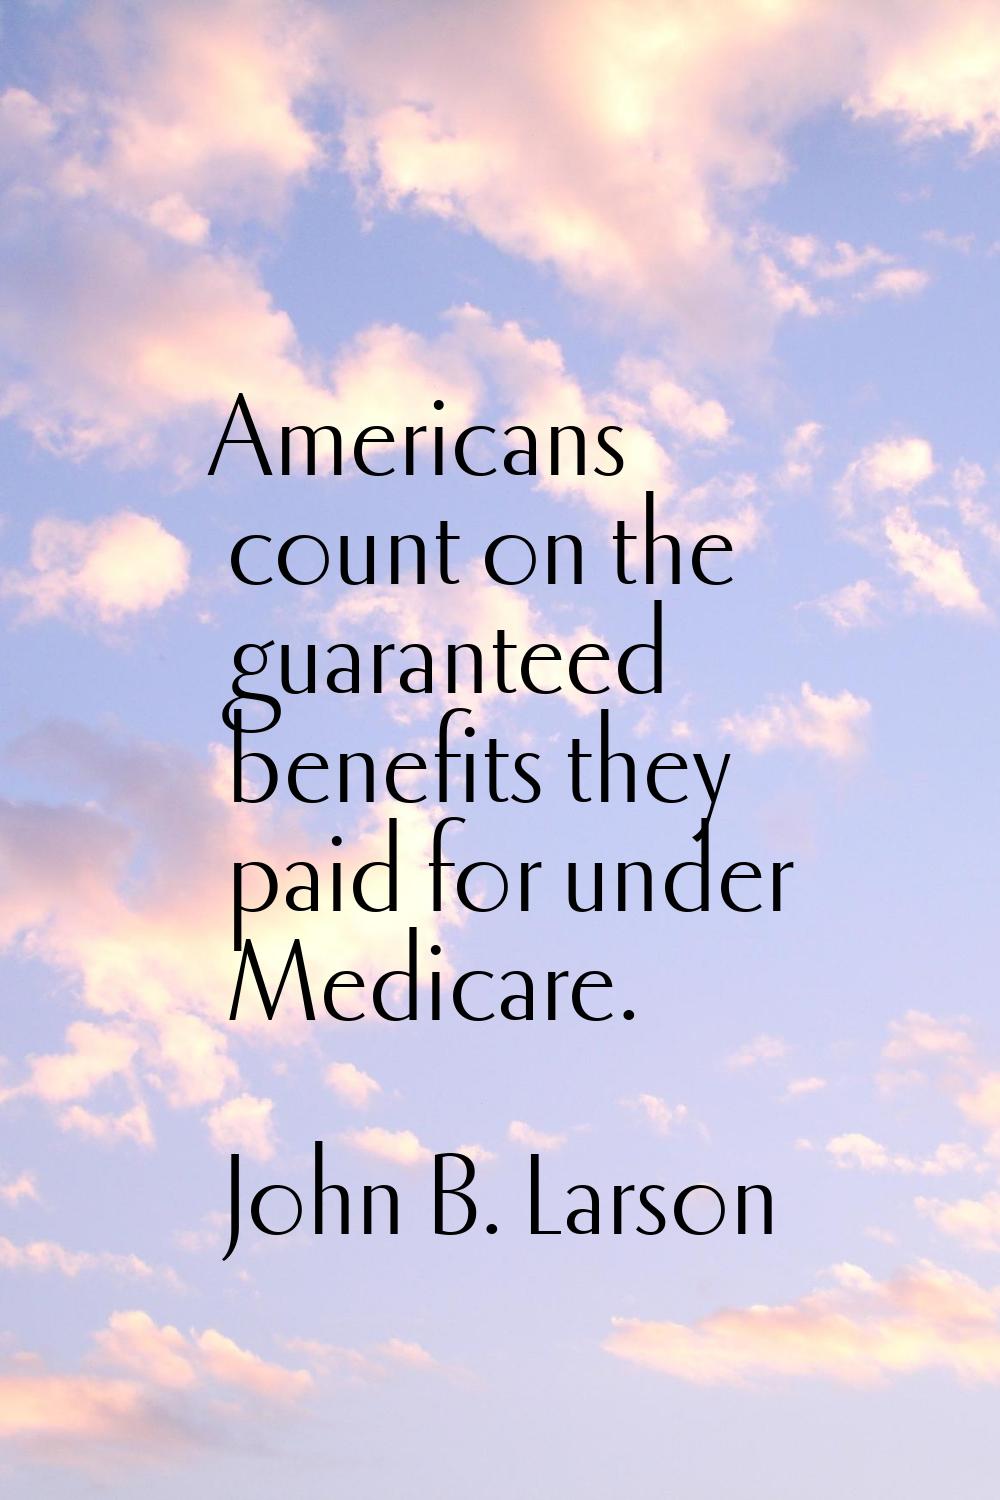 Americans count on the guaranteed benefits they paid for under Medicare.